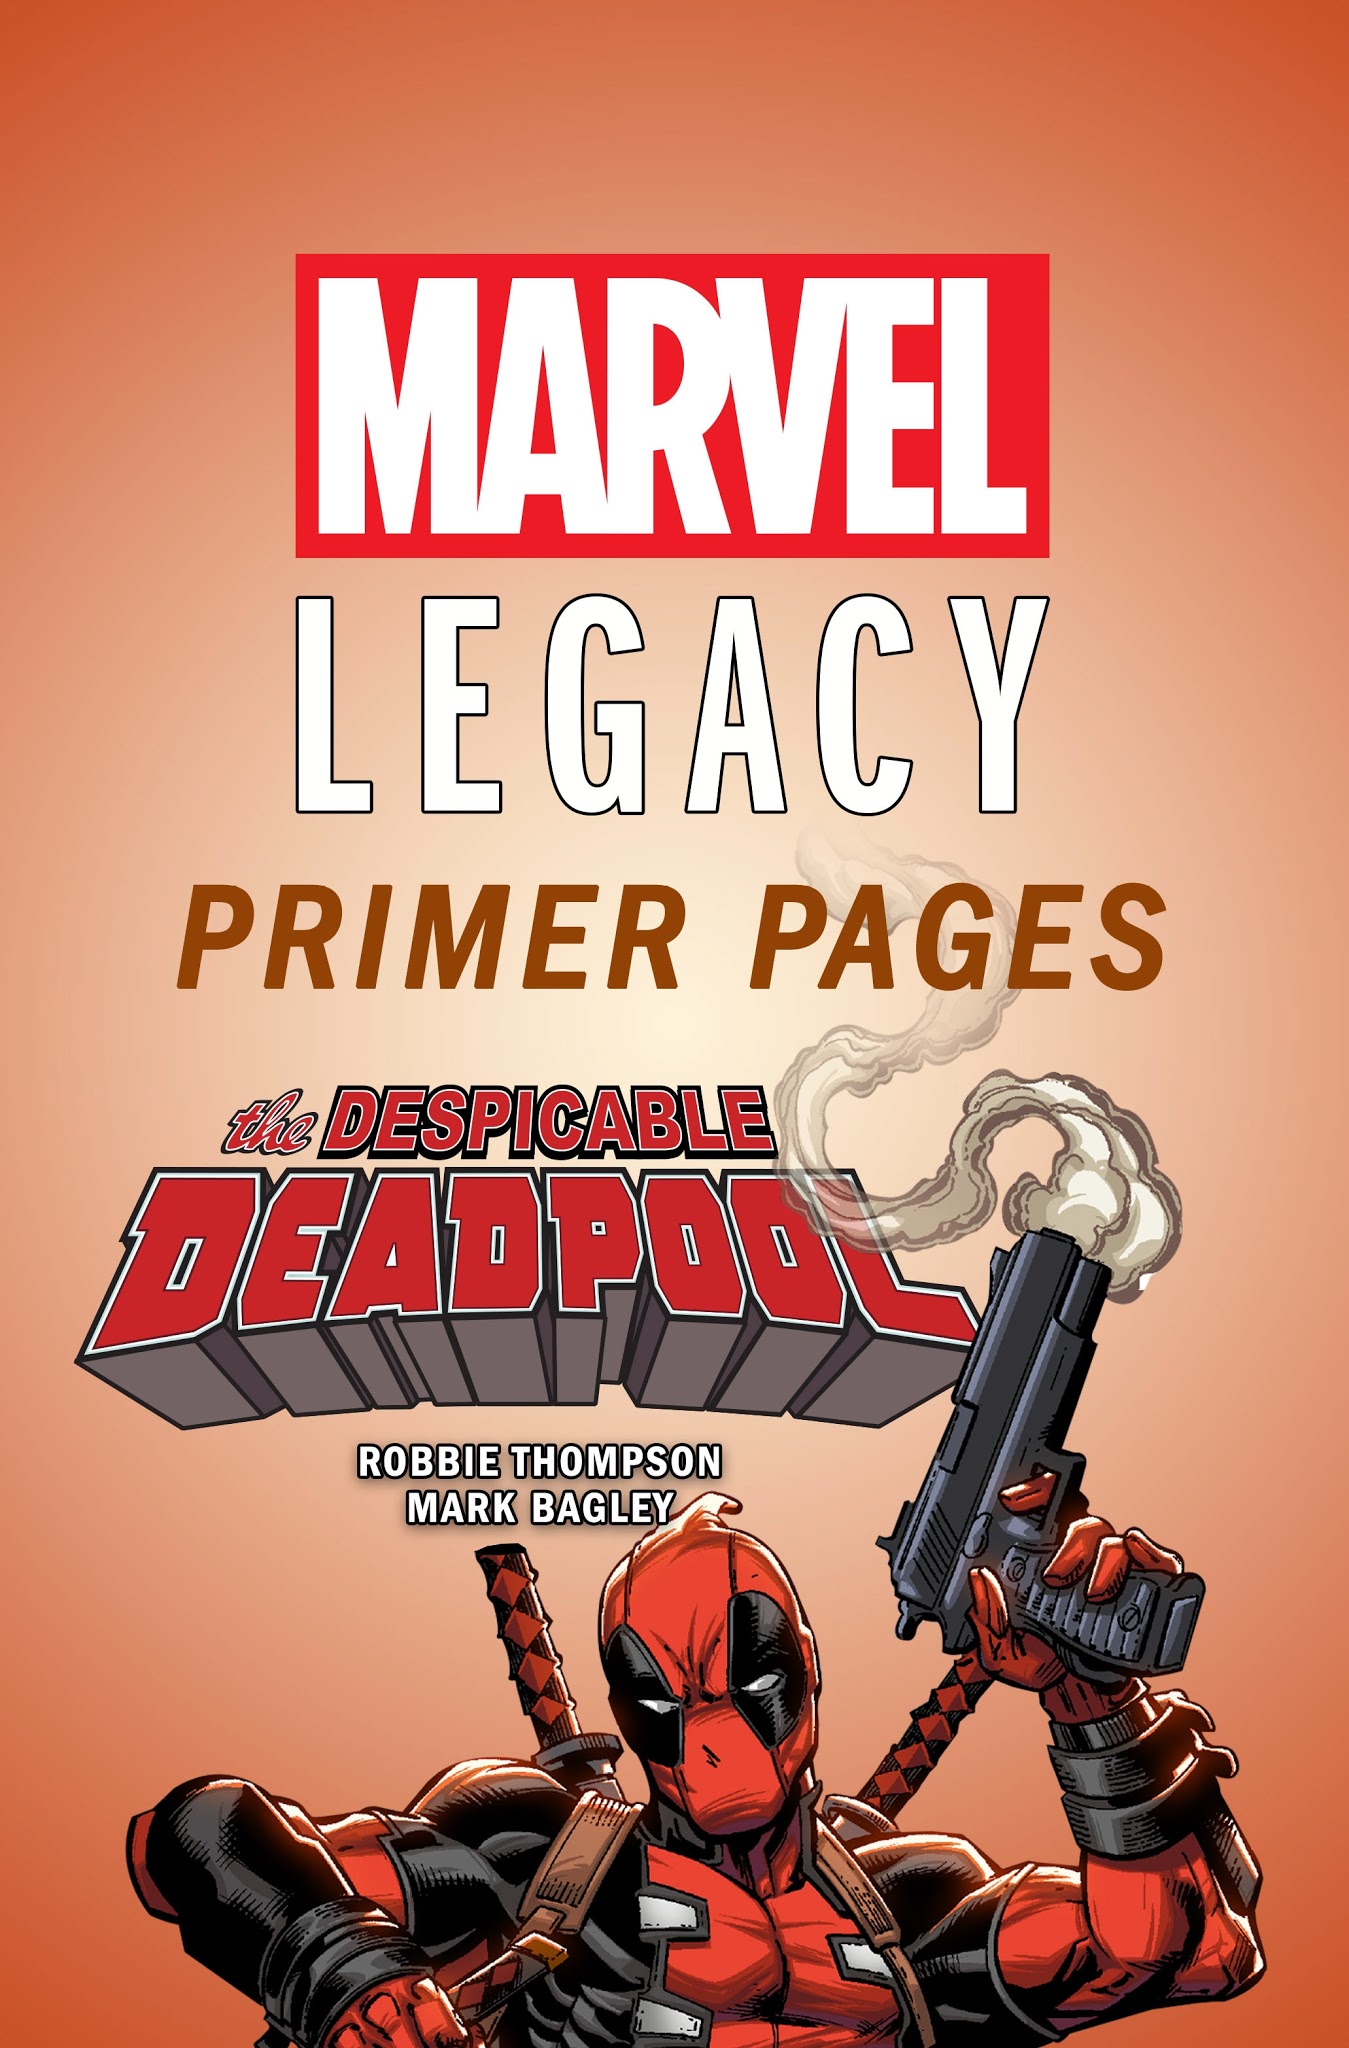 Read online Despicable Deadpool comic -  Issue # _Marvel Legacy Primer Pages - 1